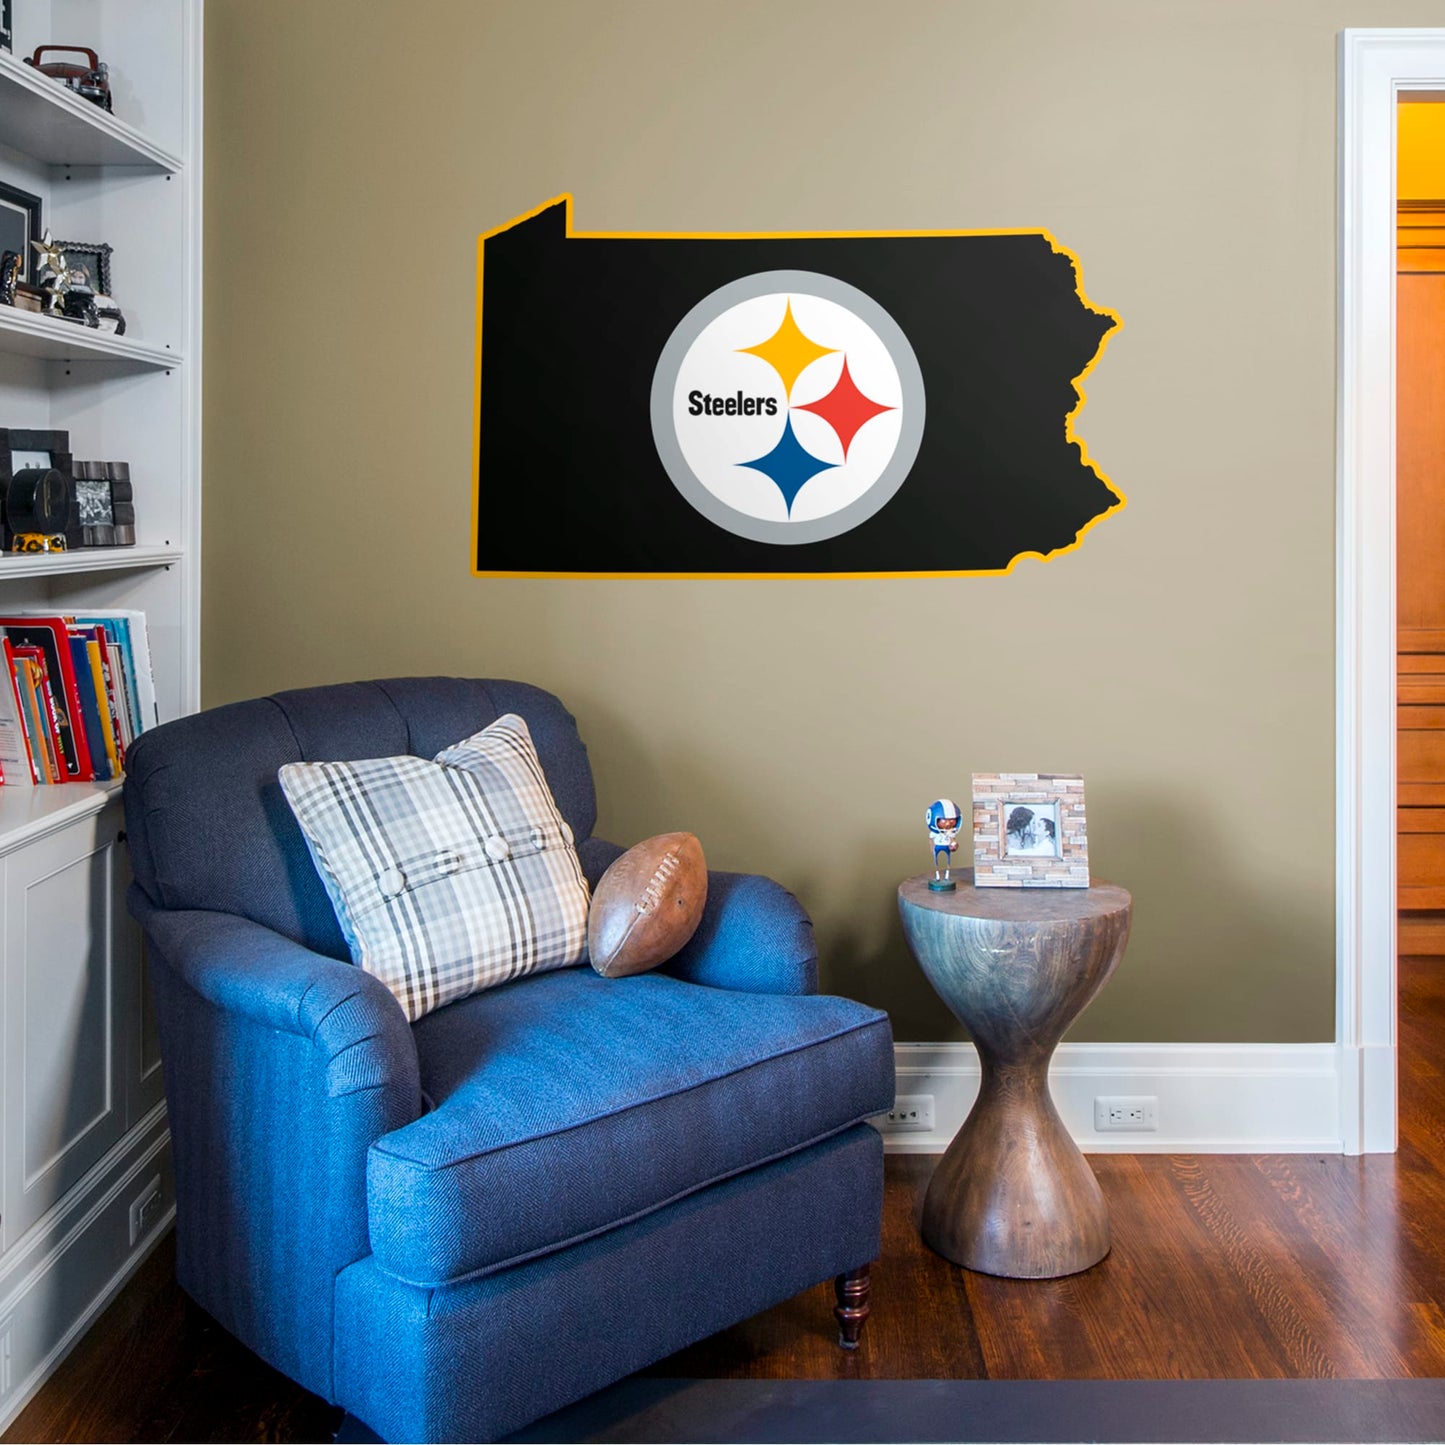 Pittsburgh Steelers: State of Pennsylvania - Officially Licensed NFL Removable Wall Decal